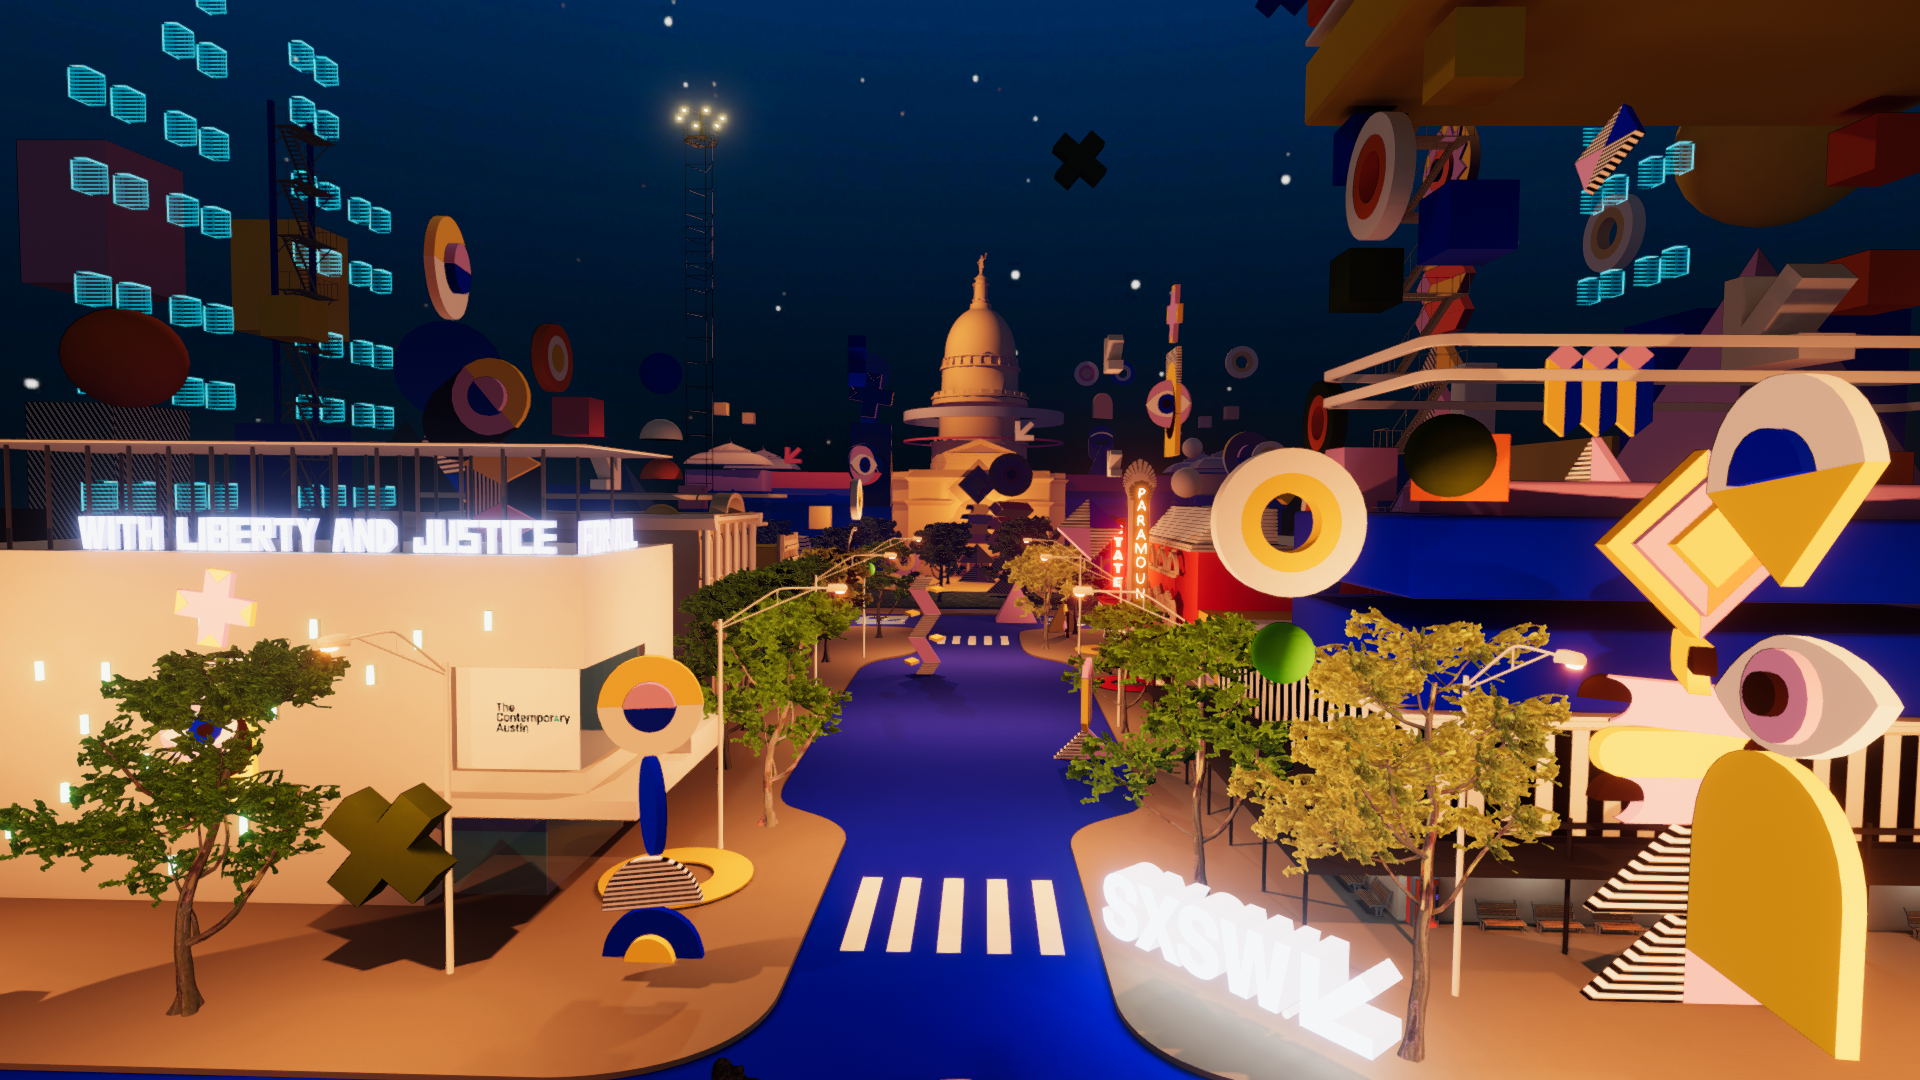 A view on Congress Avenue from South by Southwest's virtual world for their 2021 XR experience.